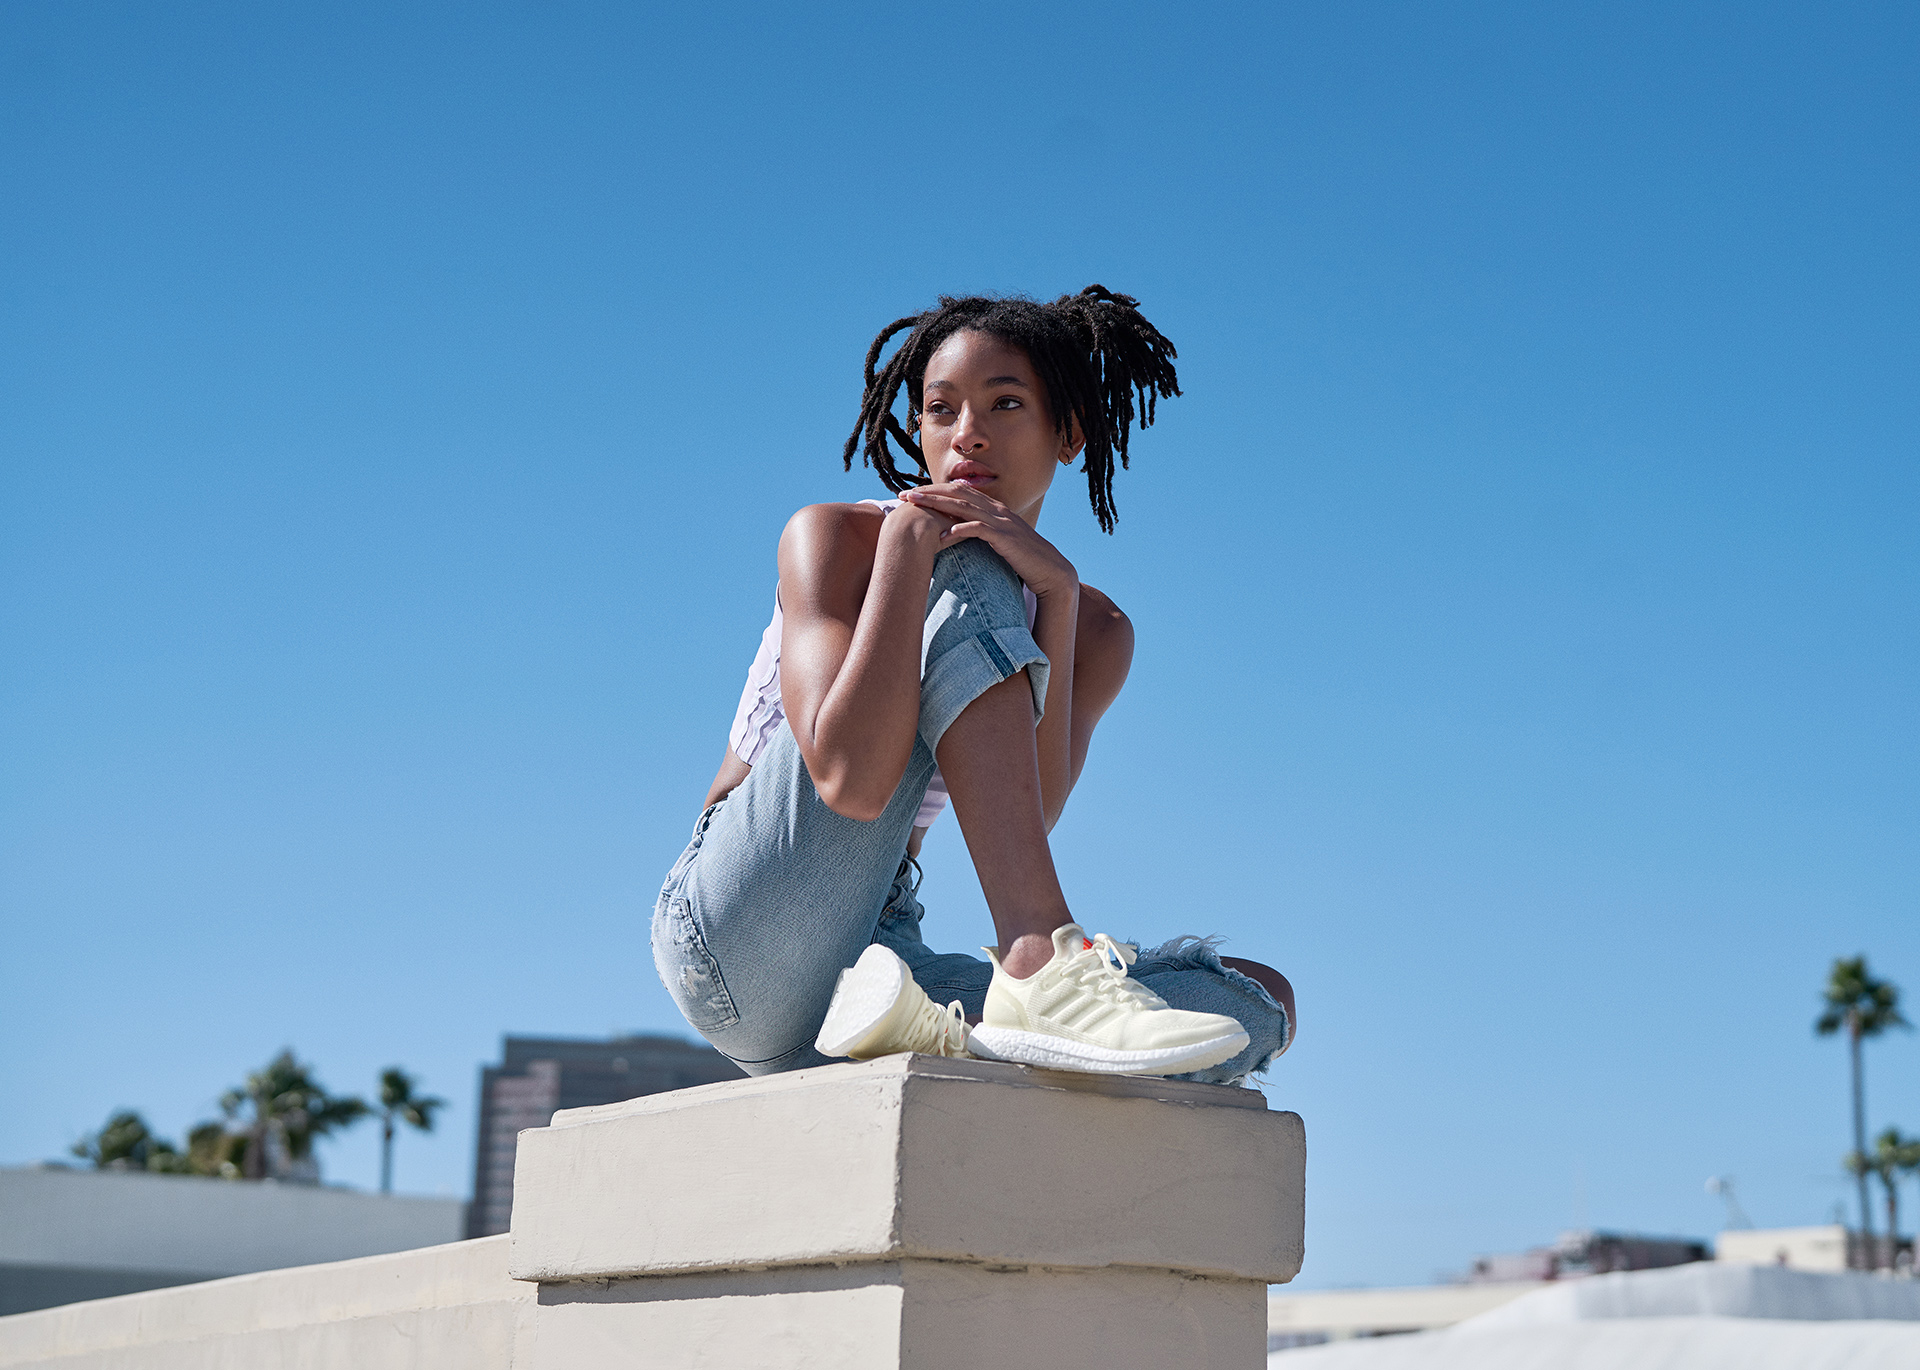 willow smith recycled adidas